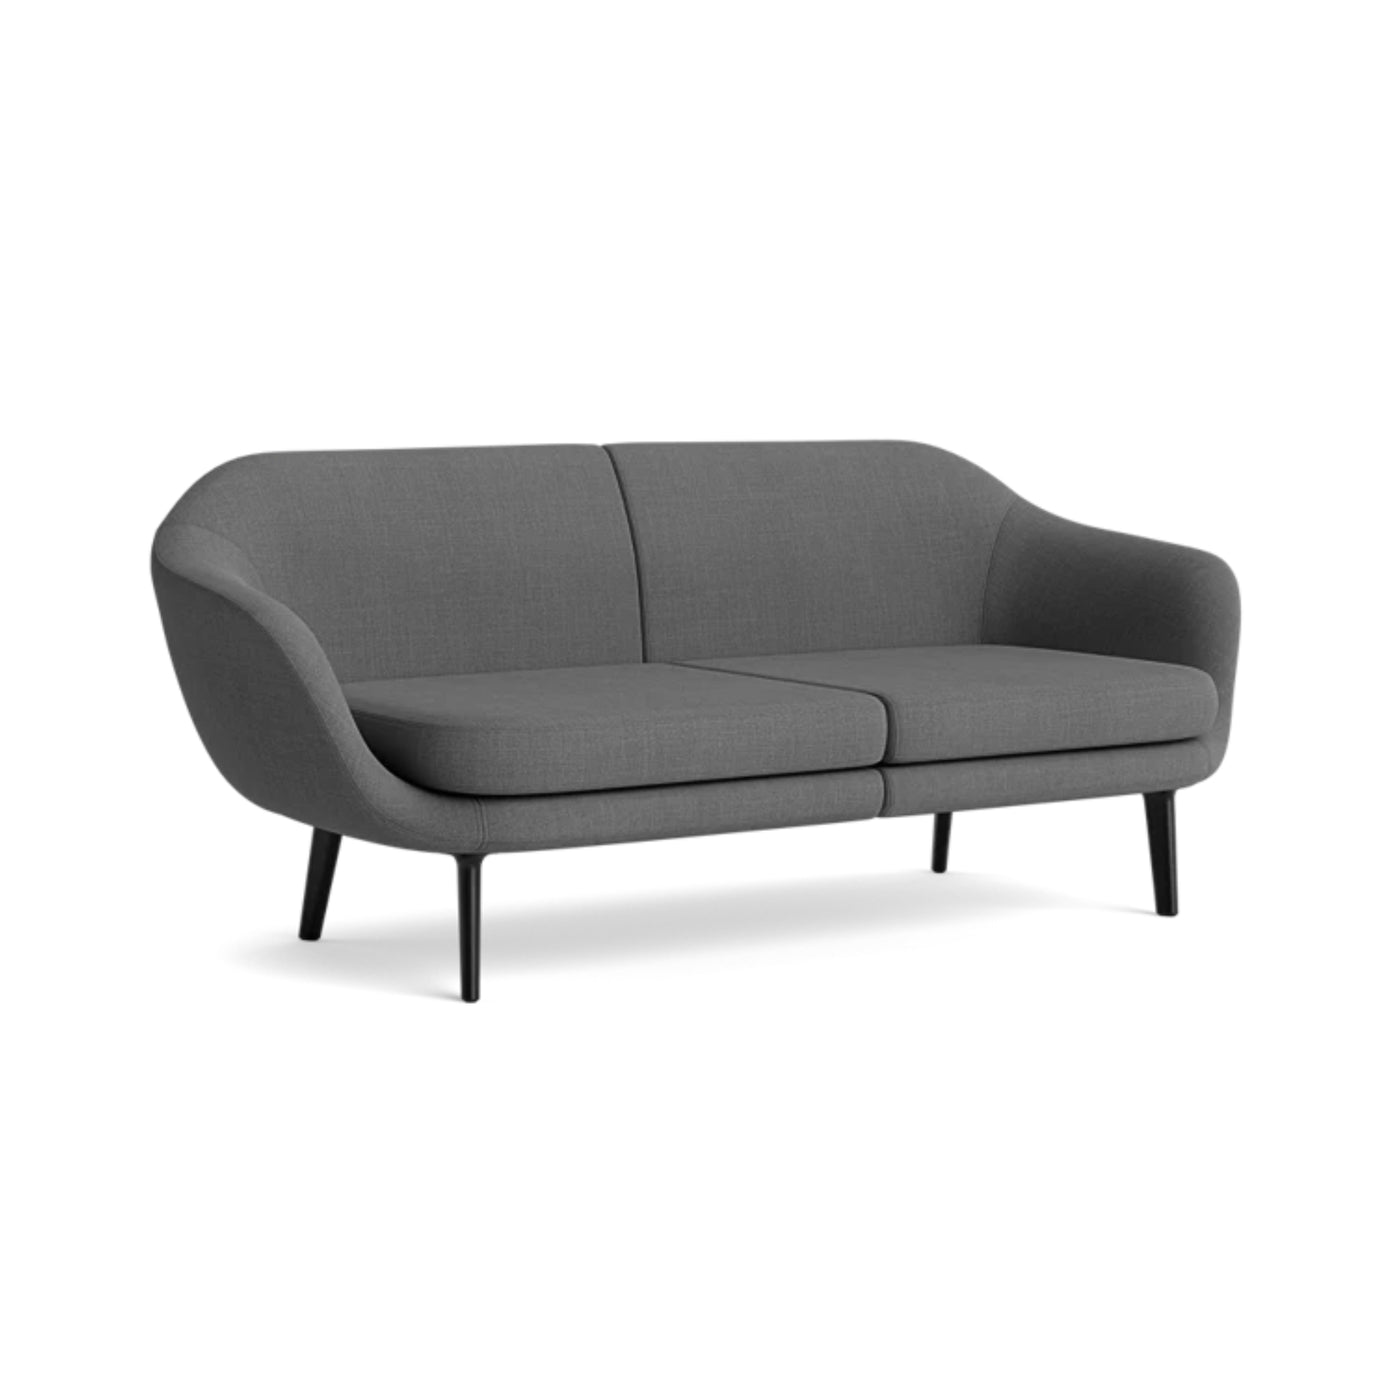 Normann Copenhagen Sum Modular 2 Seater Sofa. Made to order from someday designs. #colour_remix-163